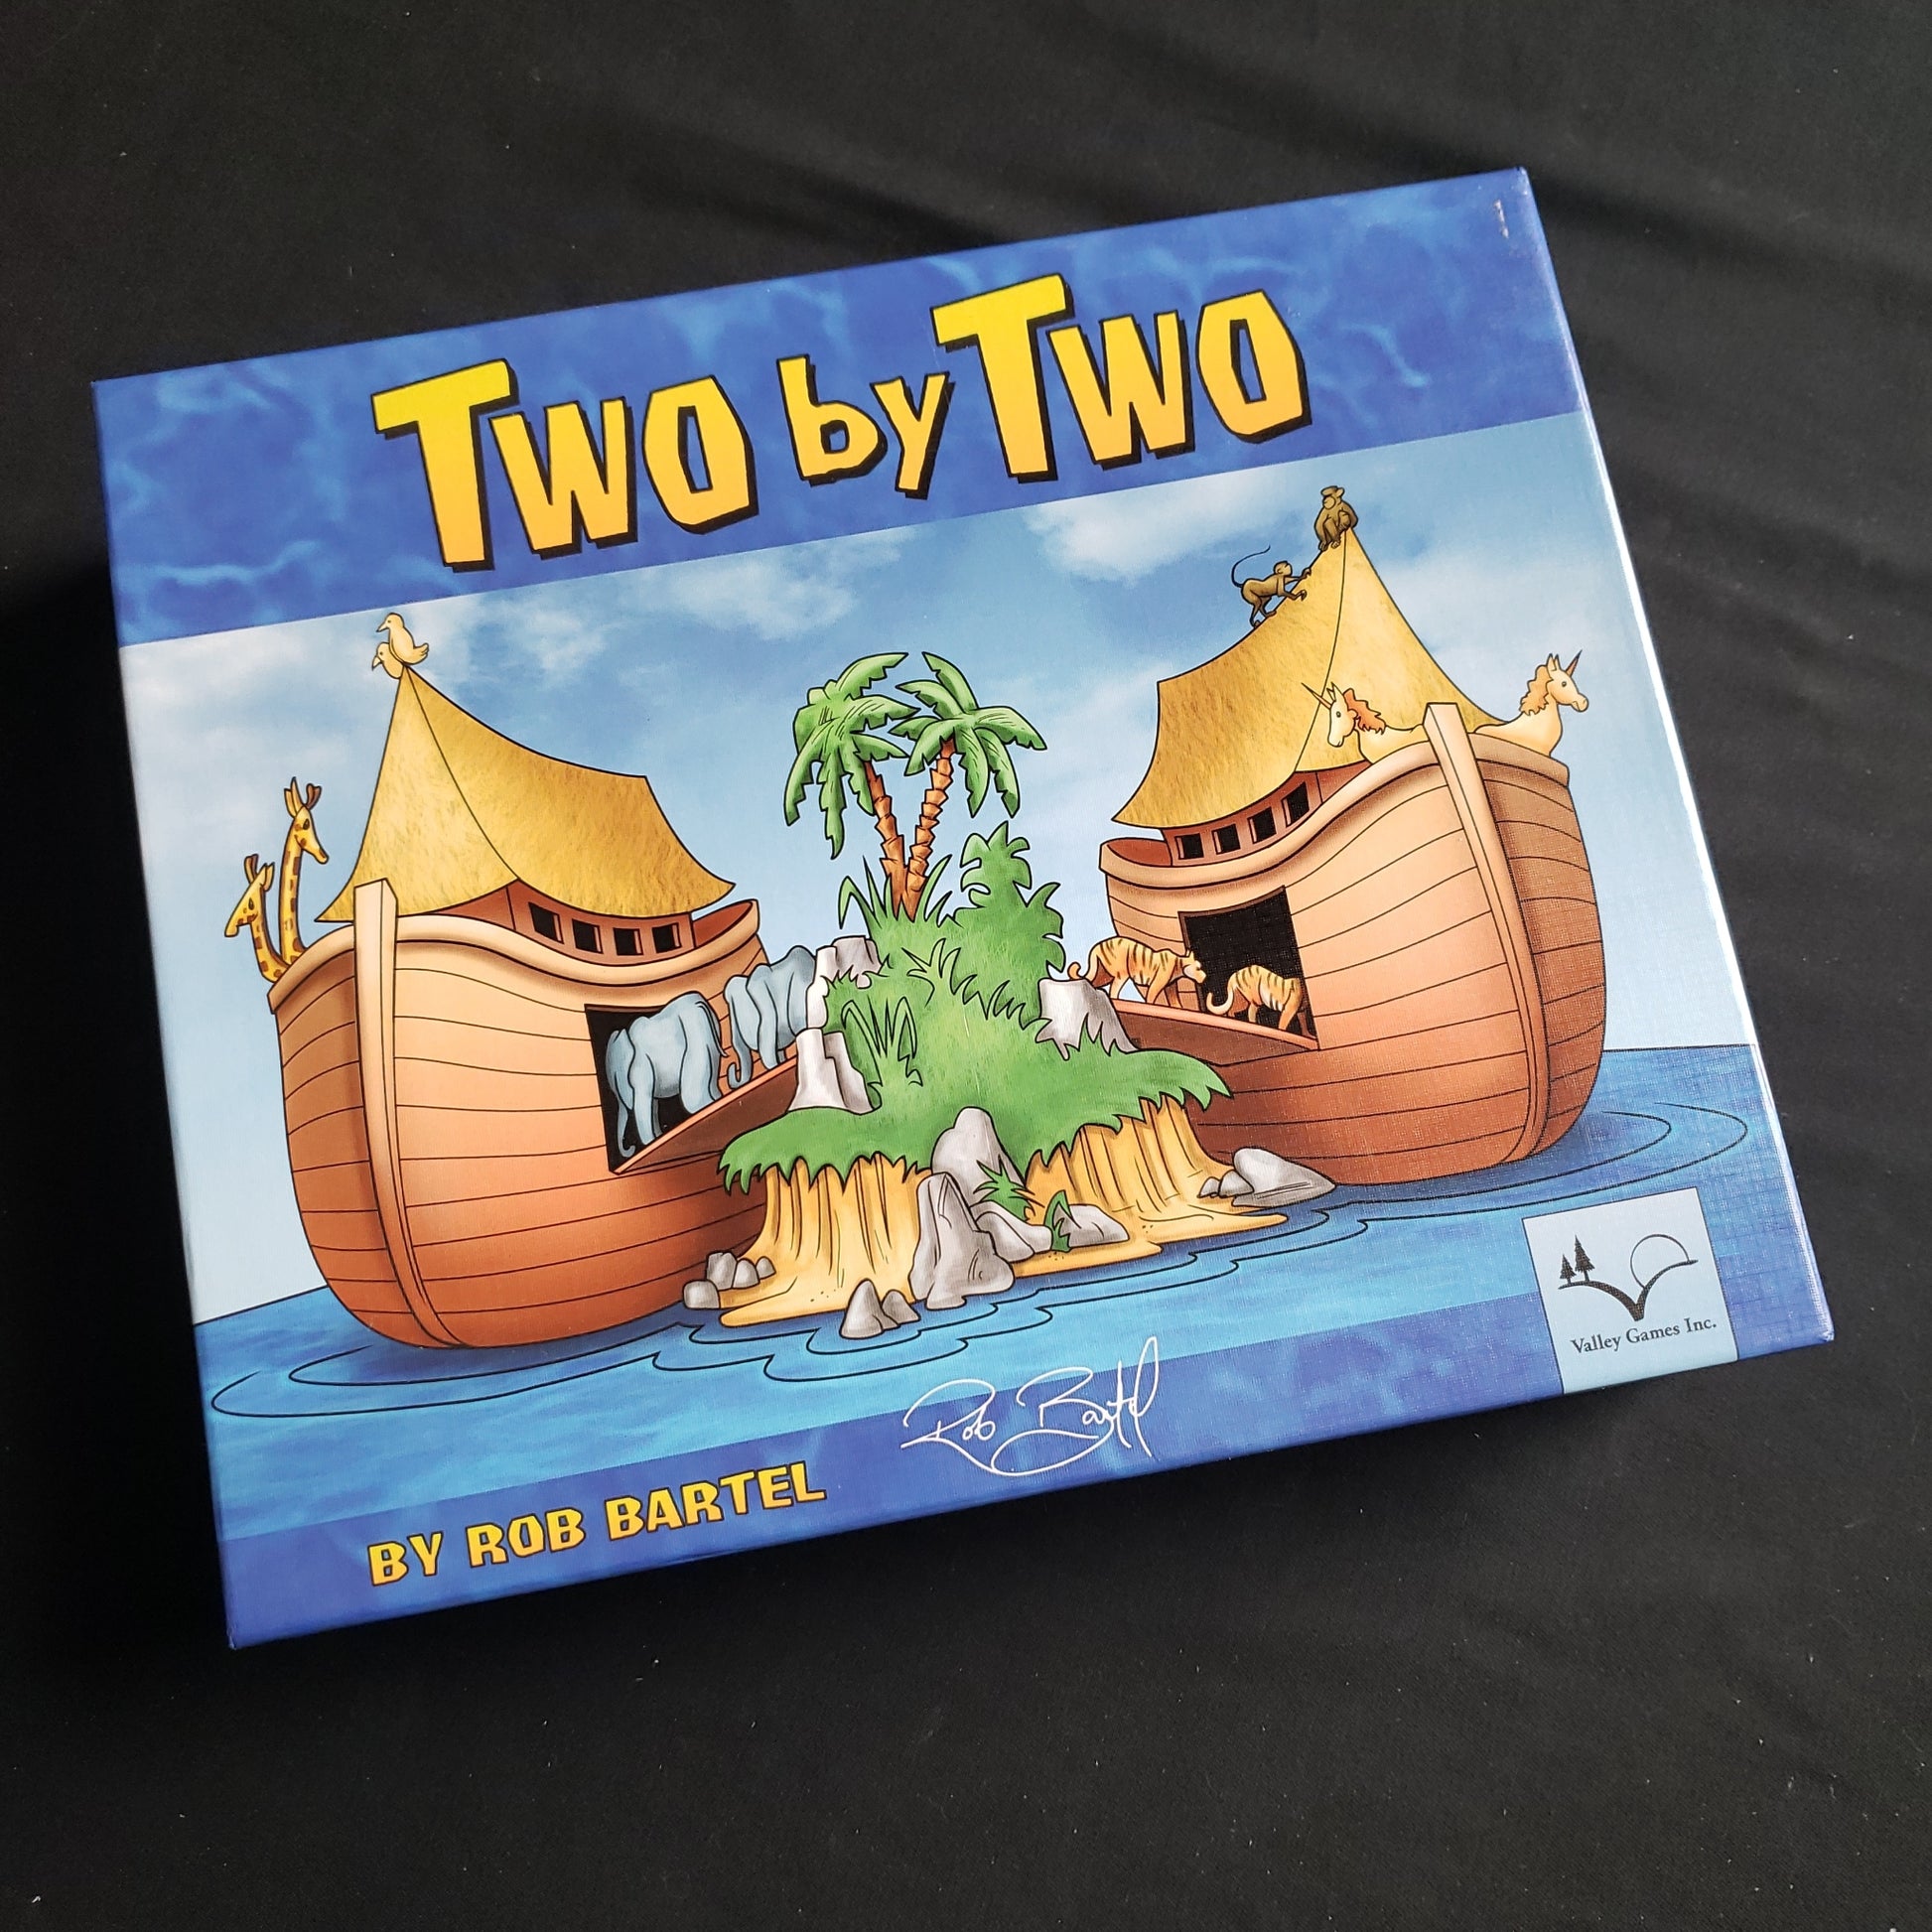 Image shows the front cover of the box of the Two by Two board game